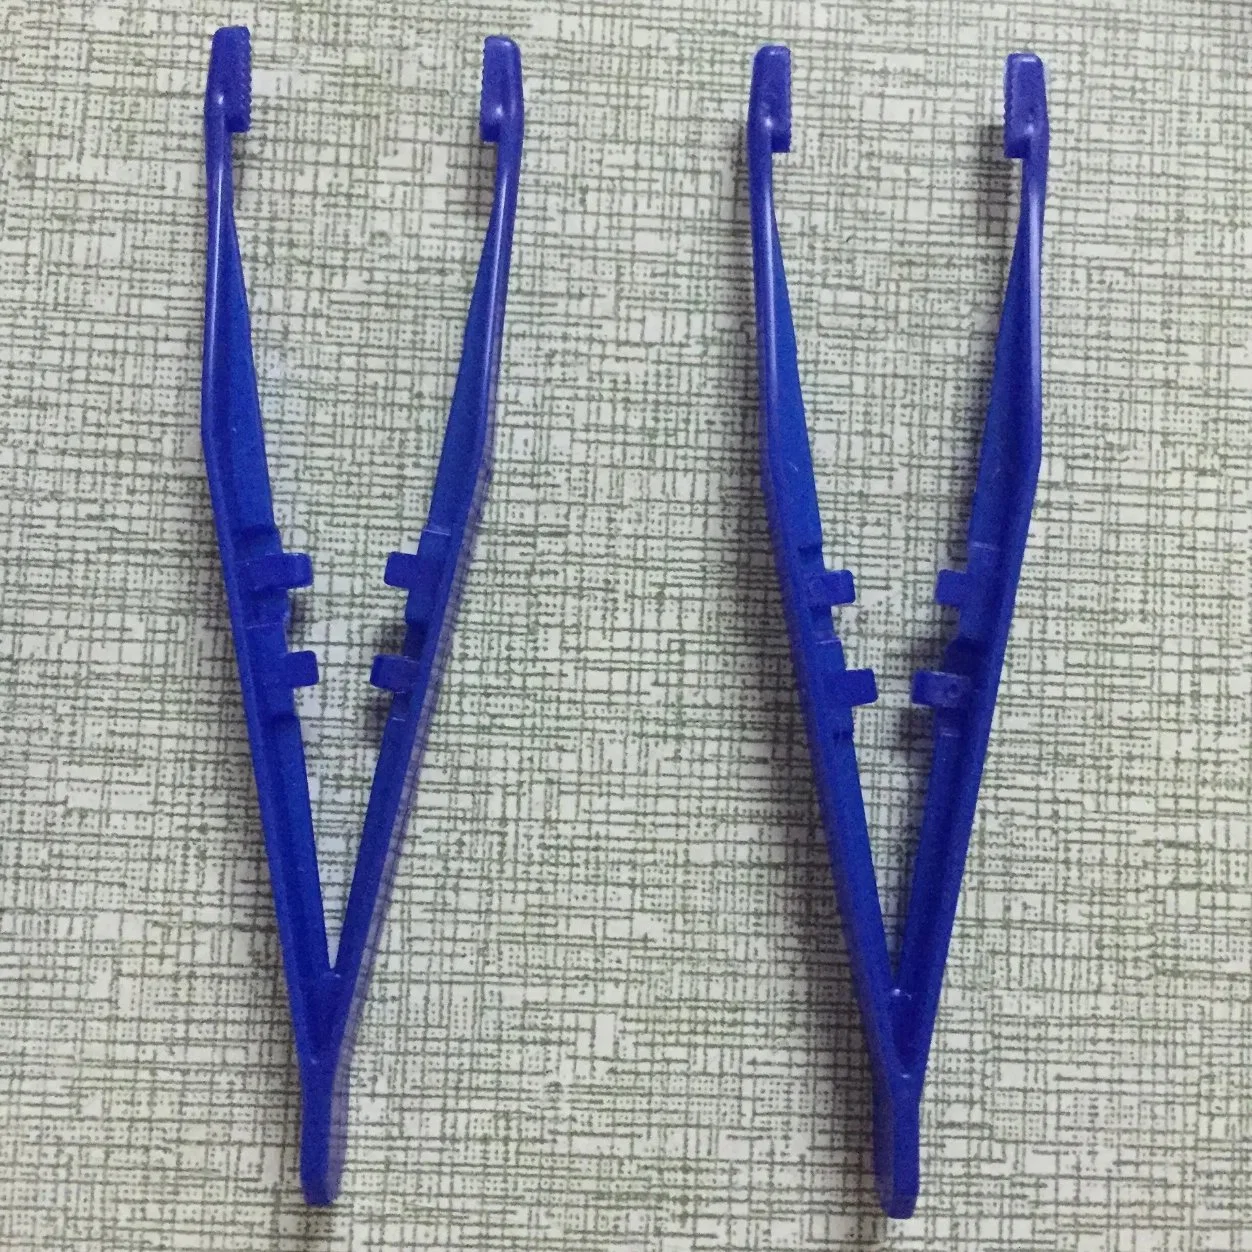 Sterile Medical Disposable Surgical Tweezers Plastic Medical Forceps for Wholesale